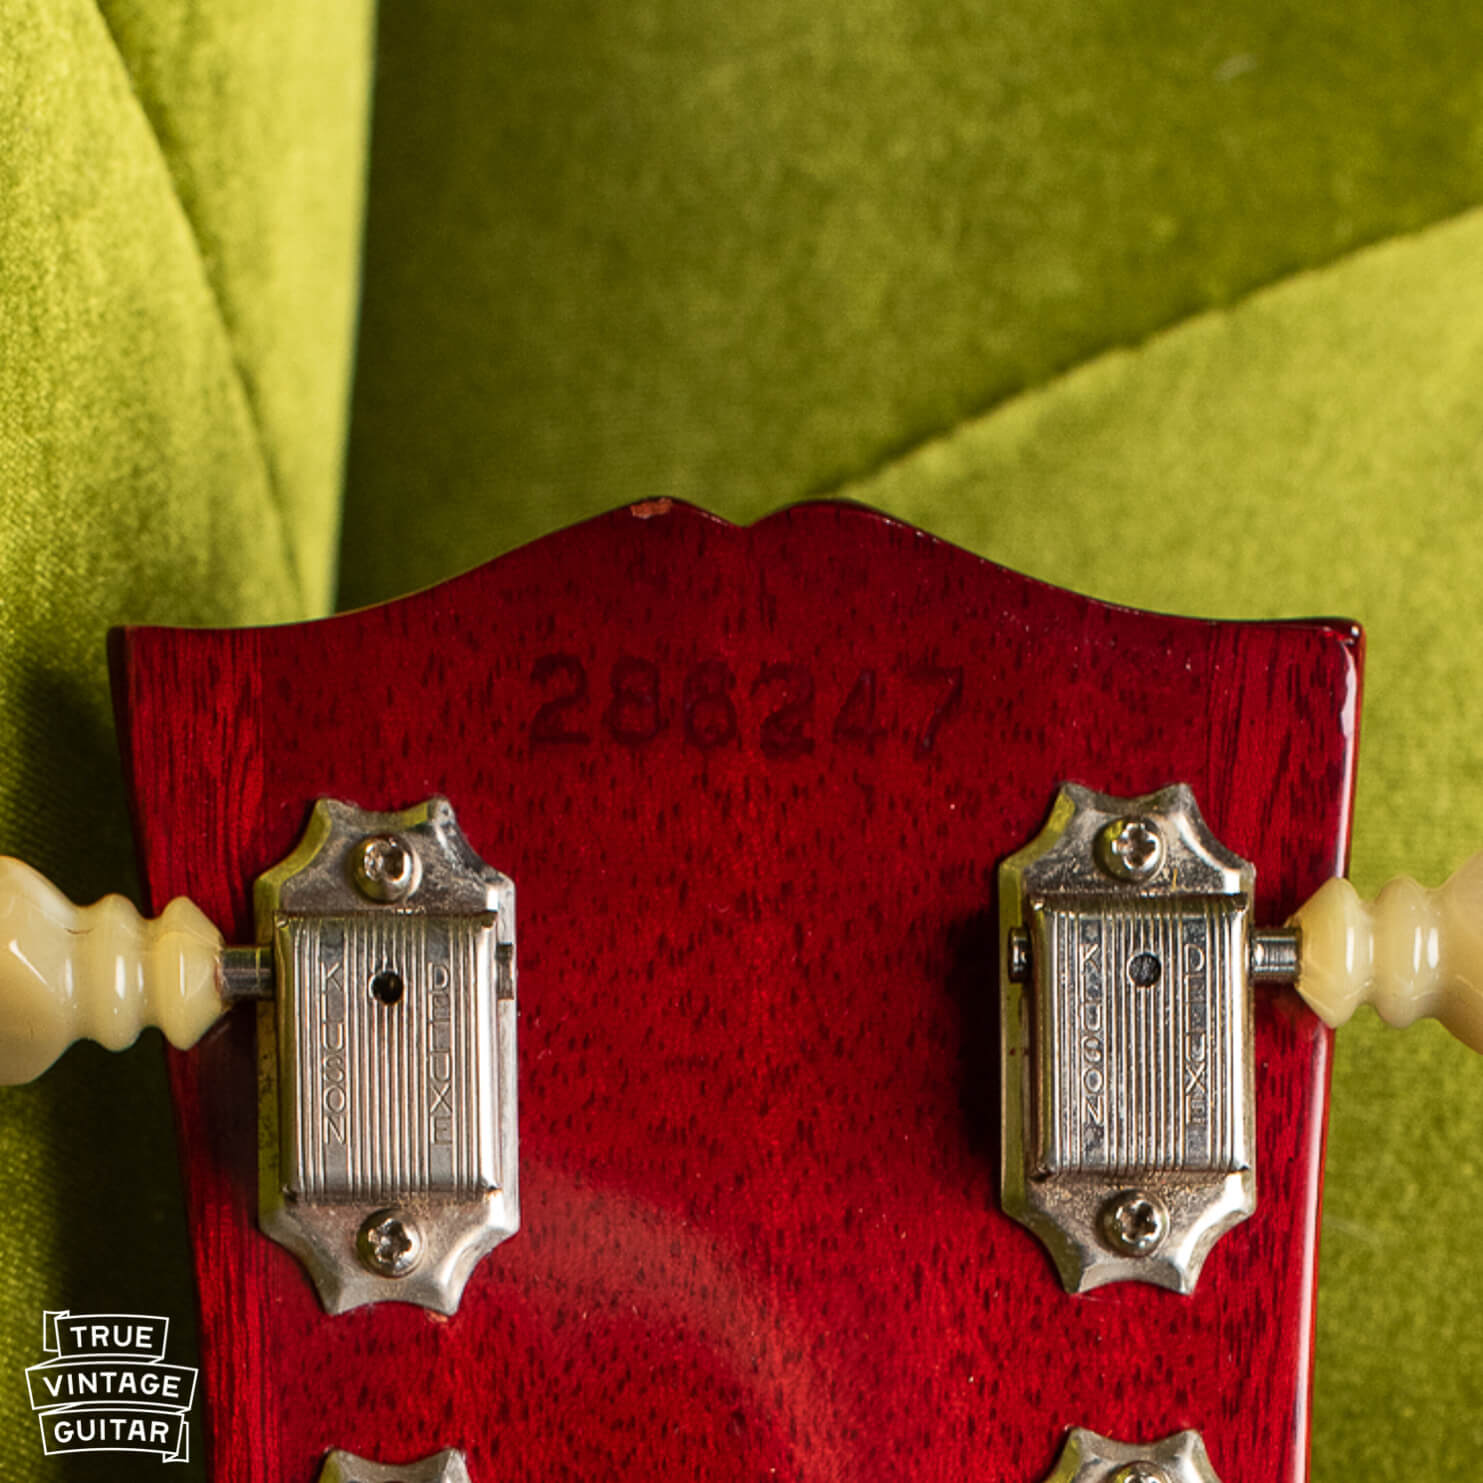 How to date Gibson SG 1965 with serial number